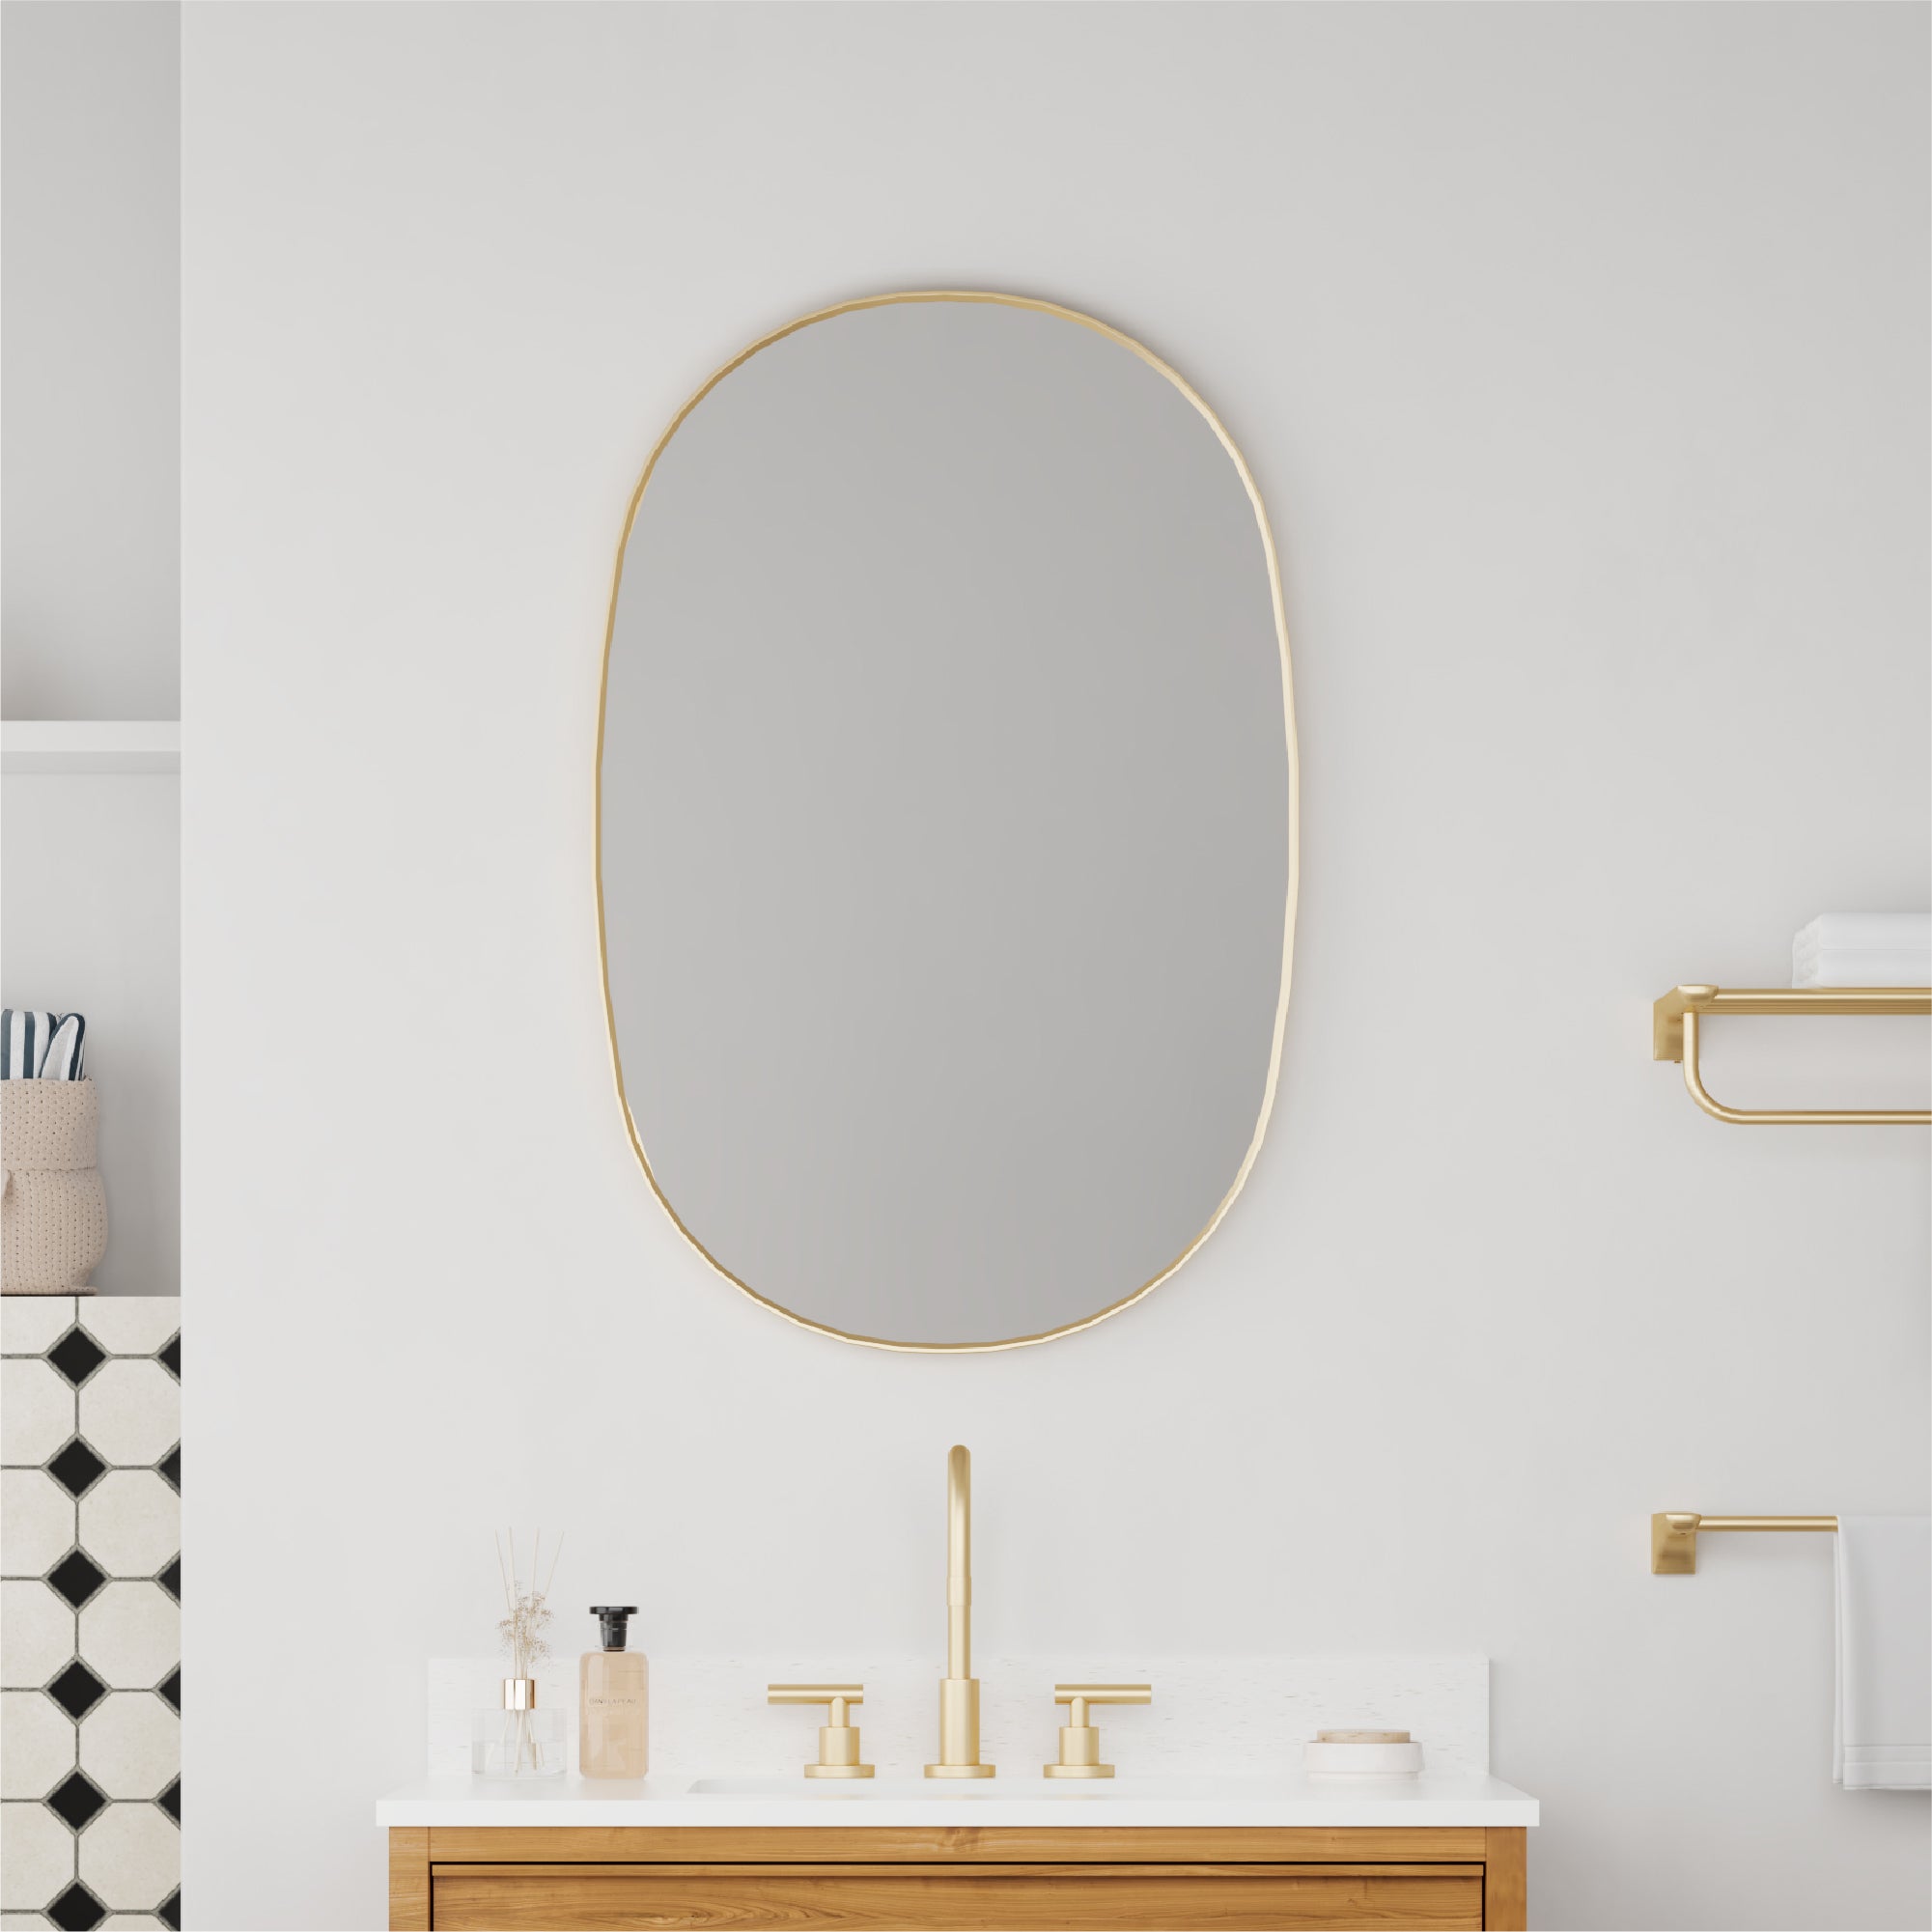 24 in. W. x 36 in. H Oval Framed Wall Bathroom Vanity Mirror in Brushed Gold